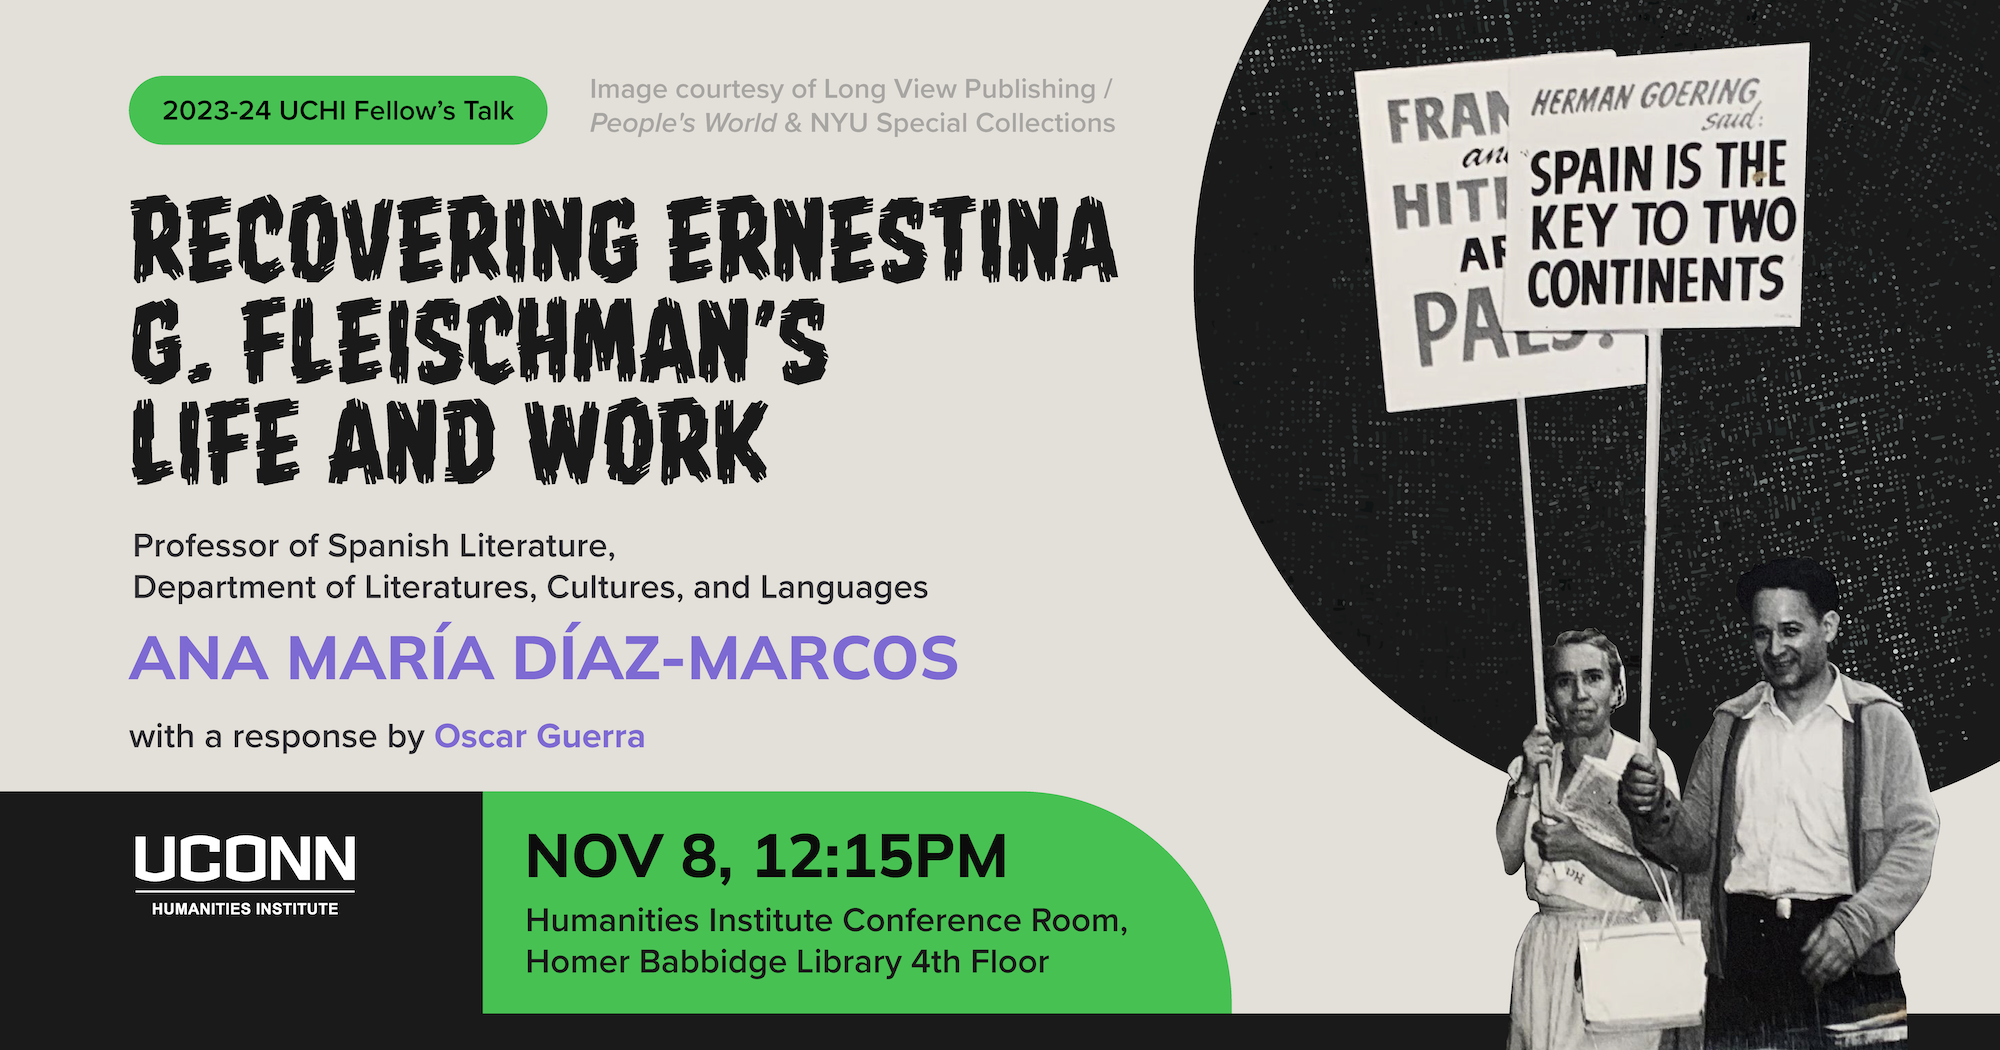 UCHI Fellow's Talk 2023–24. Recovering Ernestina G Fleischman's Life and Work. Professor of Spanish Literatures, LCL, Ana Maria Diaz Marcos, with a response by Oscar Guerra. November 8, 12:15pm. Humanities Institute Conference Room. Homer Babbidge Library, fourth floor.